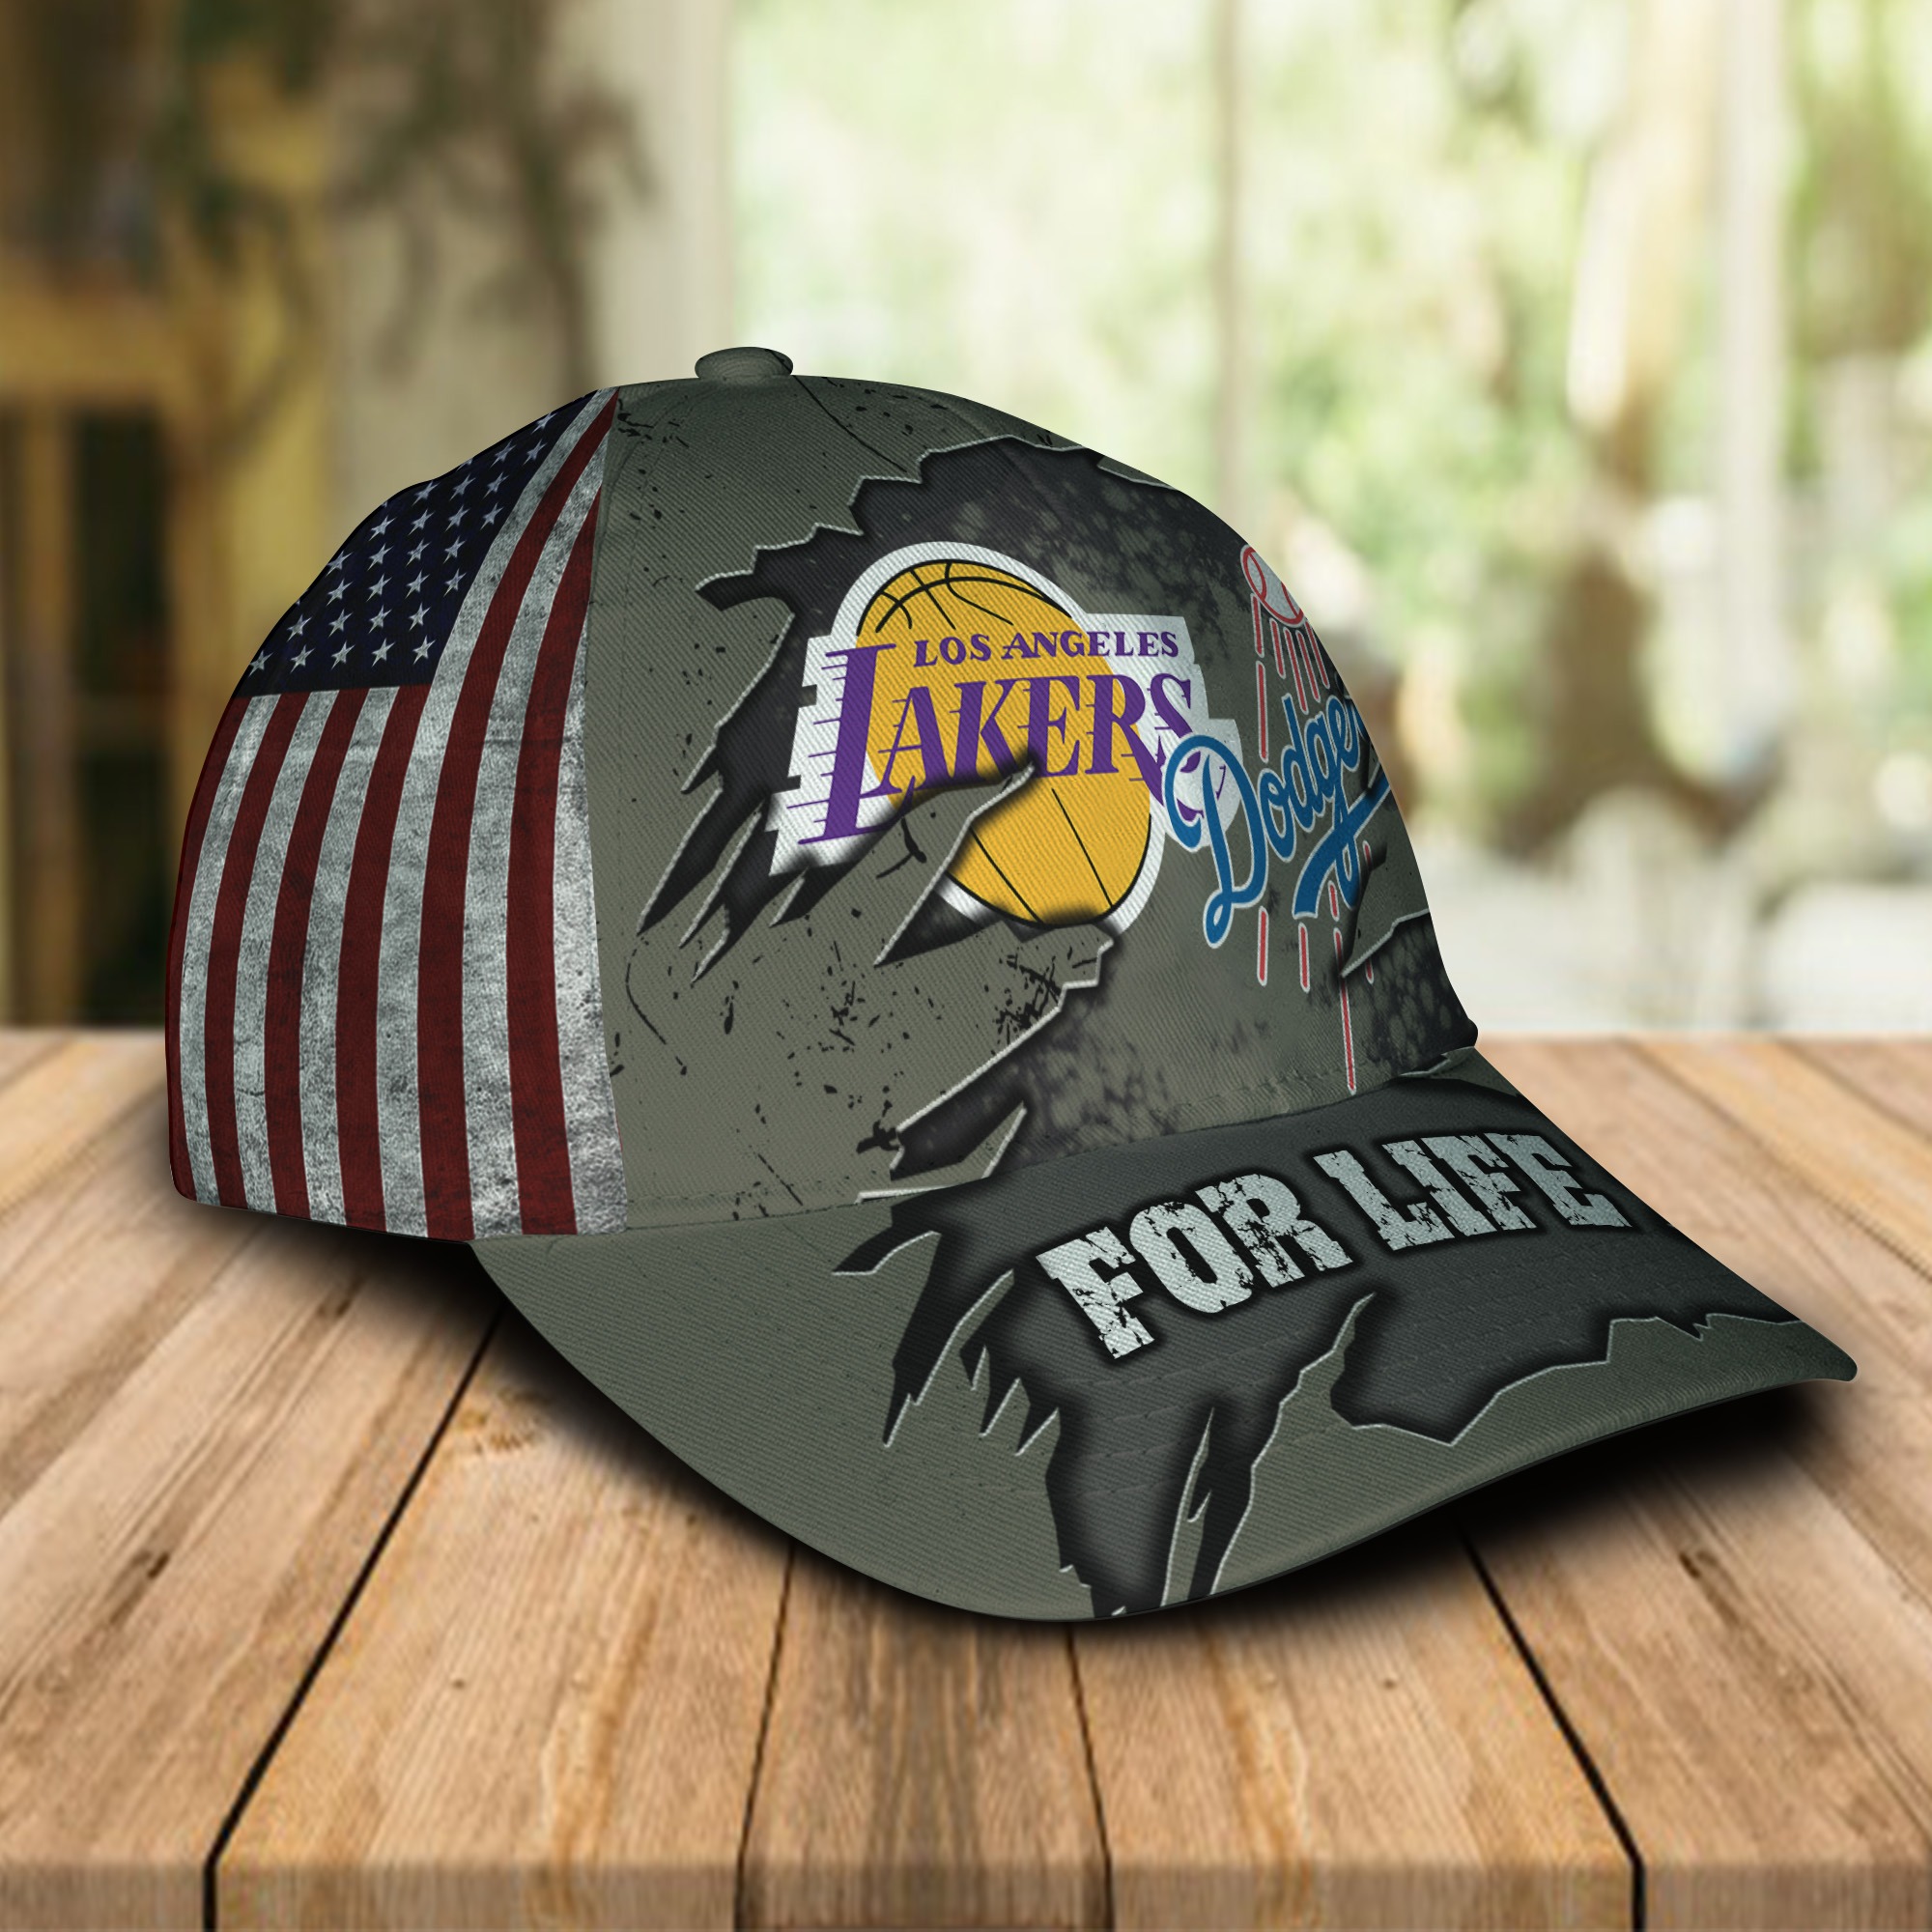 Los Angeles Dodgers Los Angeles Lakers For Life Cap 1